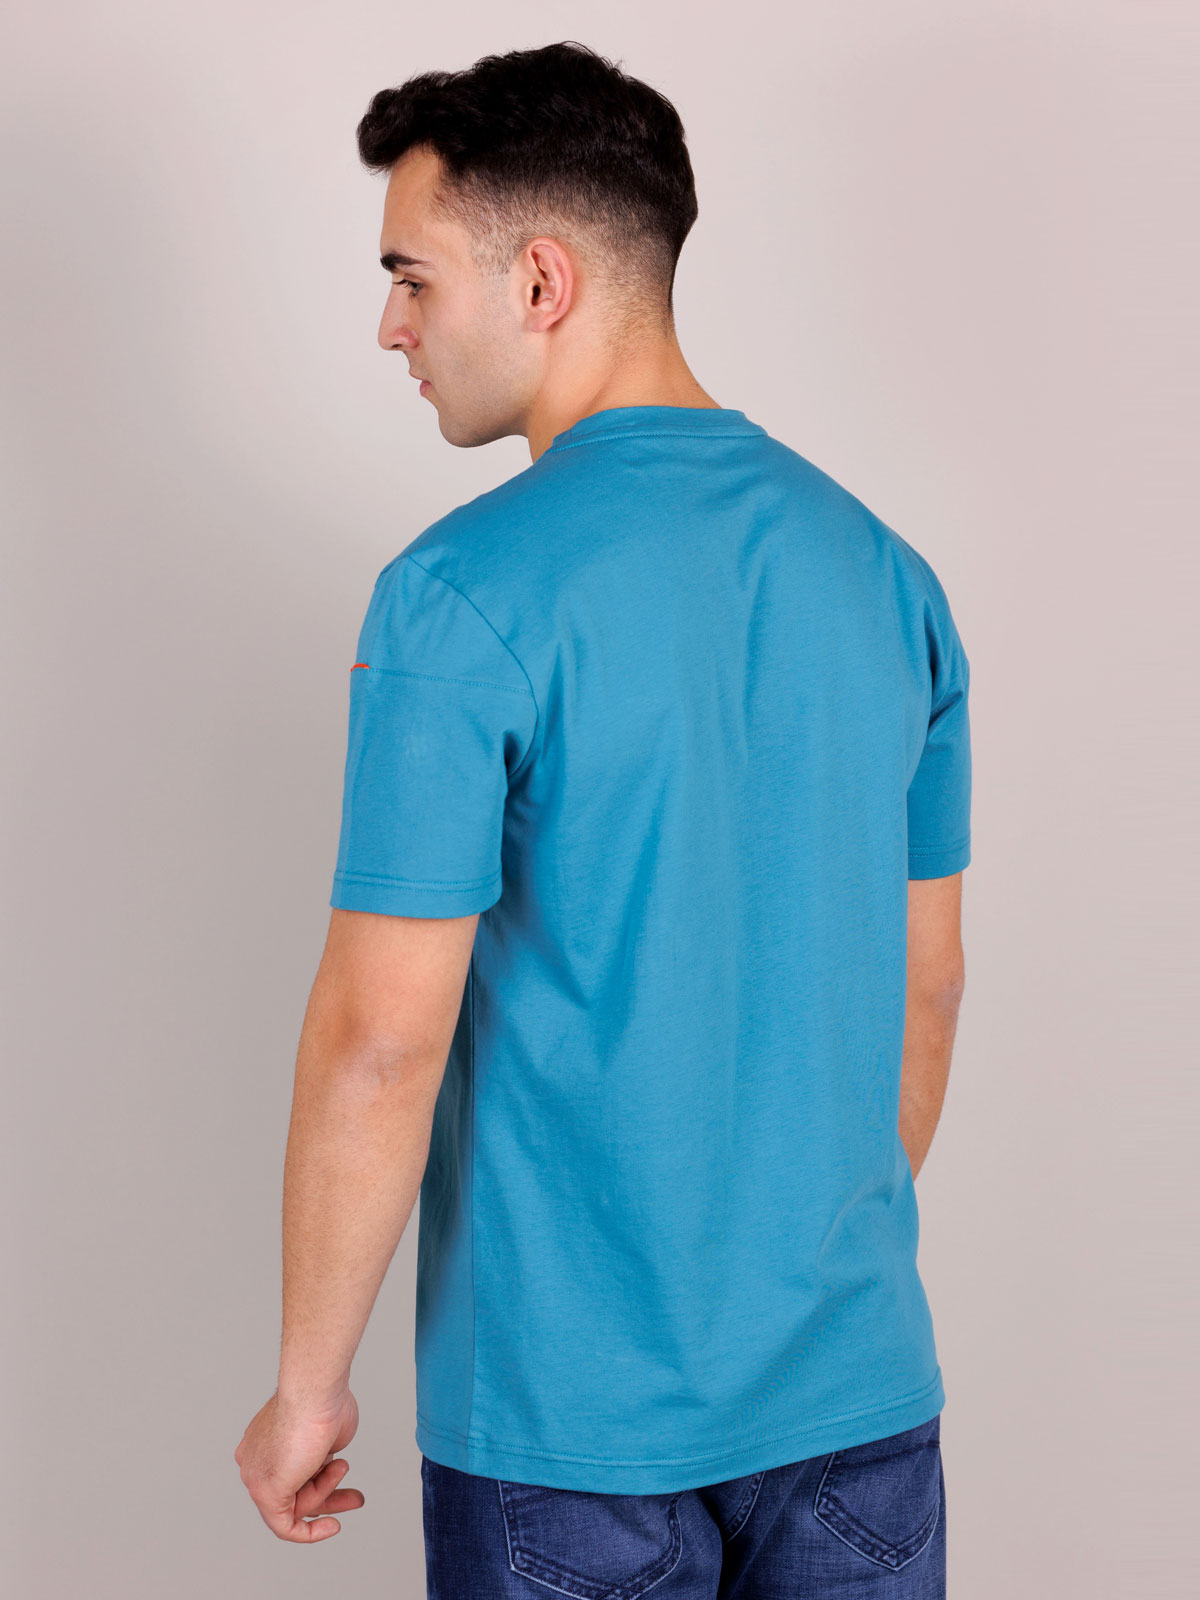 Short sleeve blouse in turquoise - 96455 € 27.00 img2